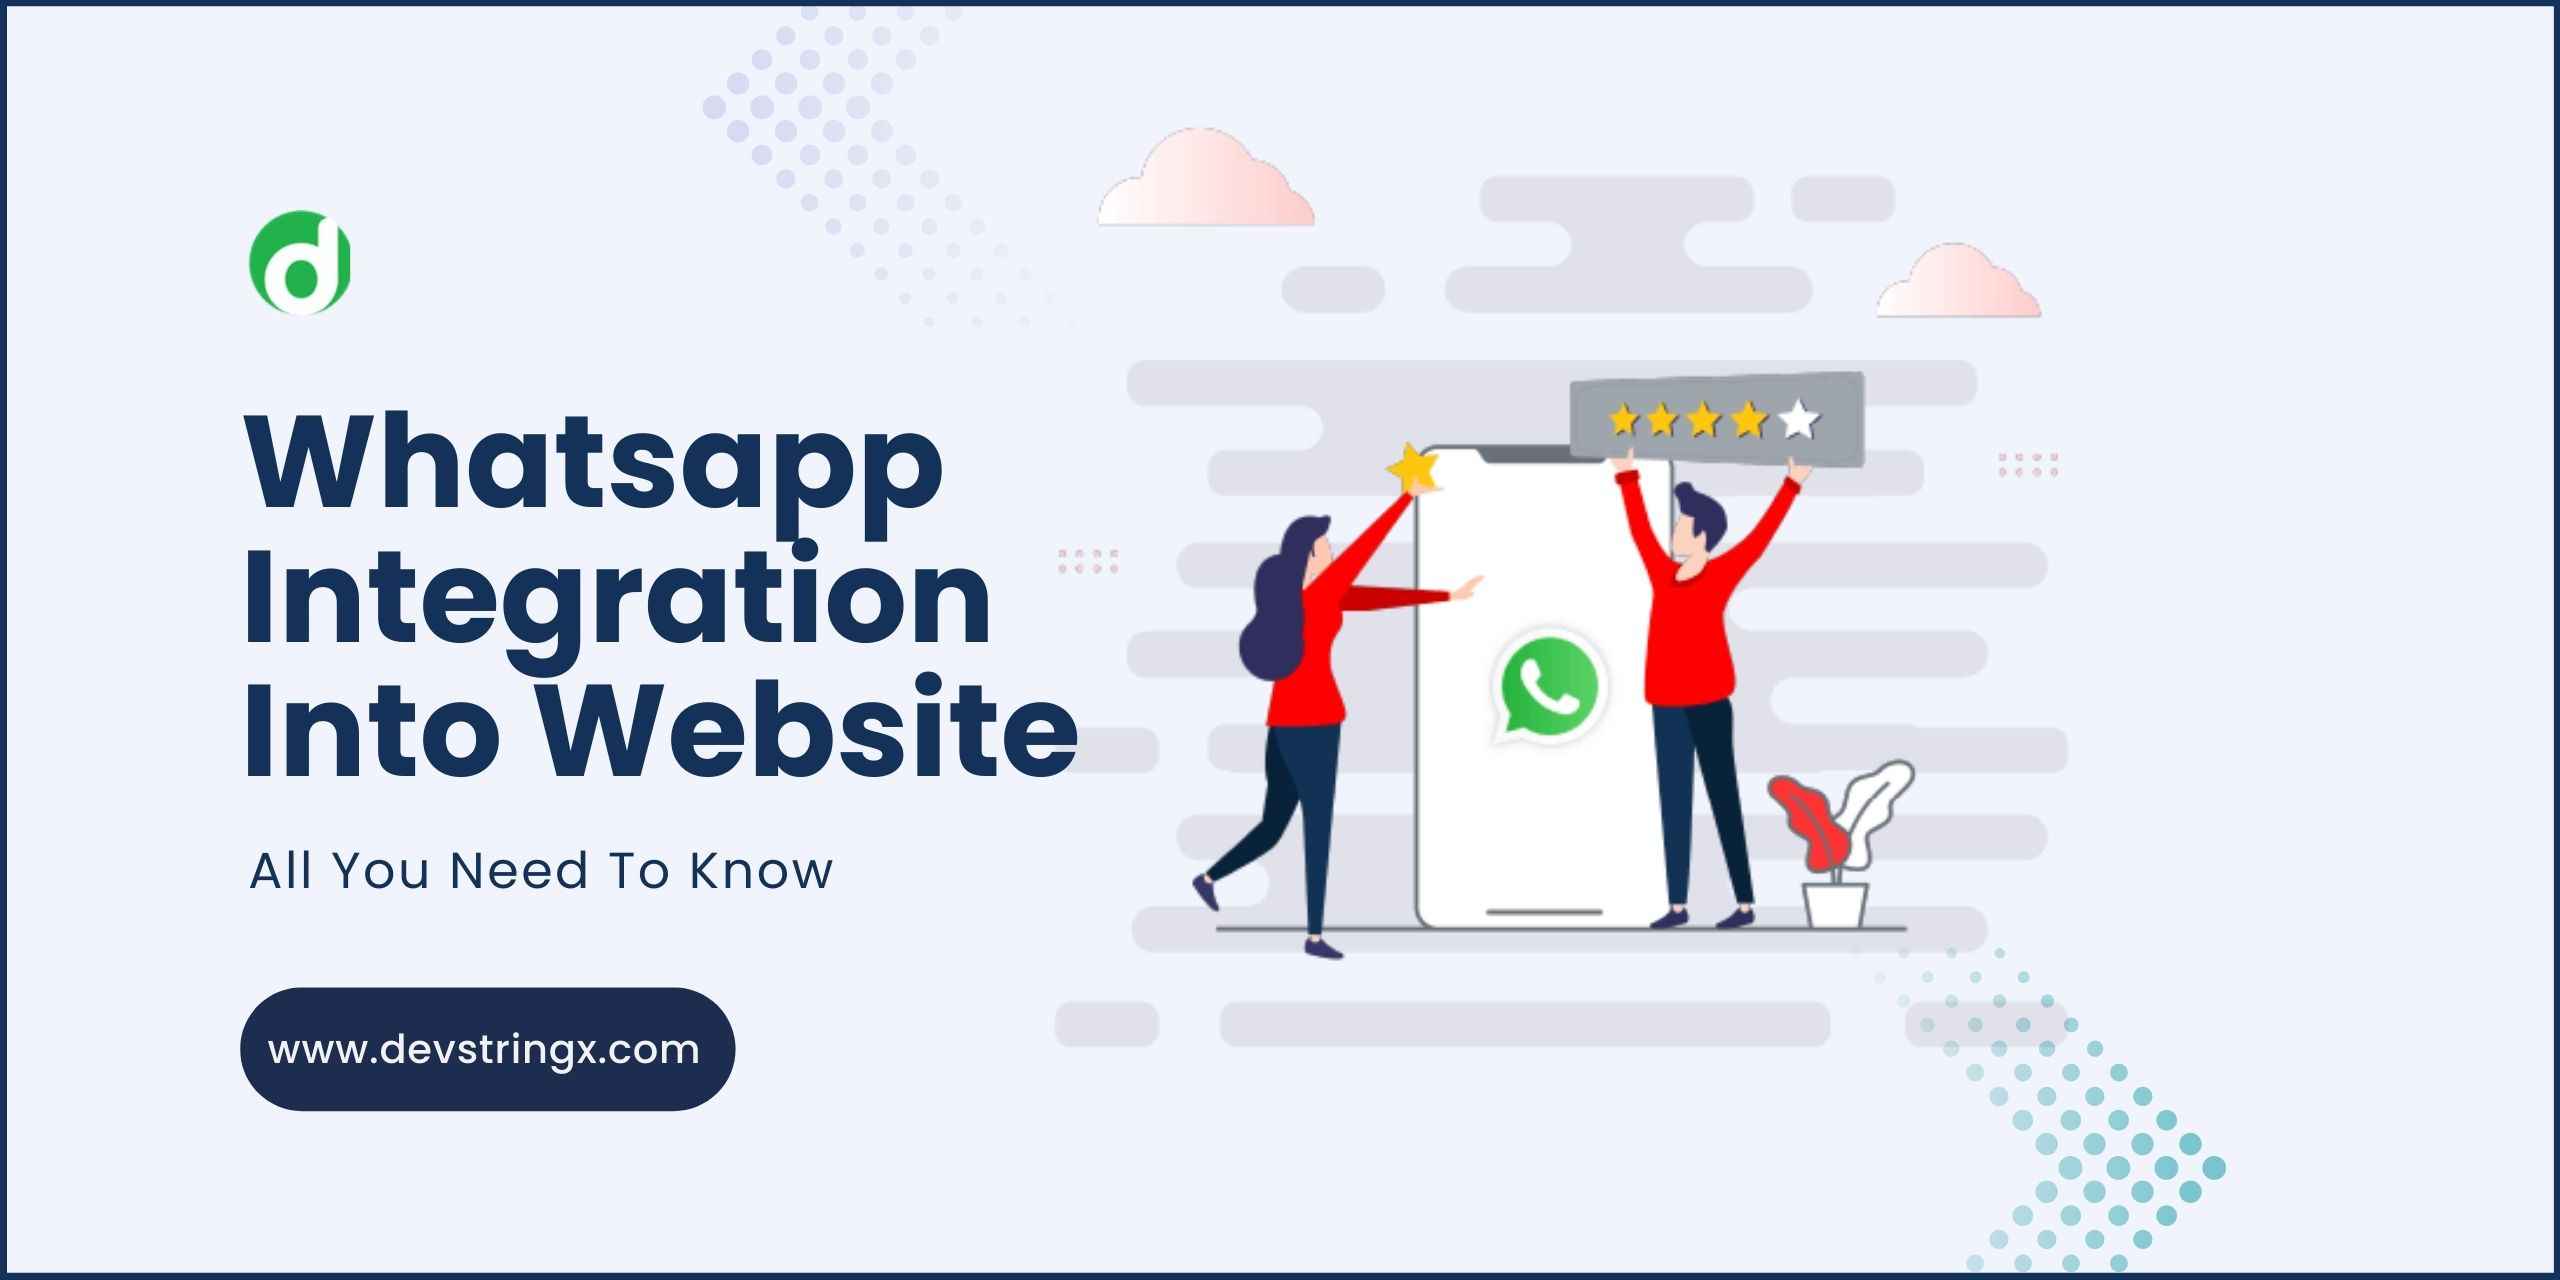 feature image for Whatsapp website Integration blog